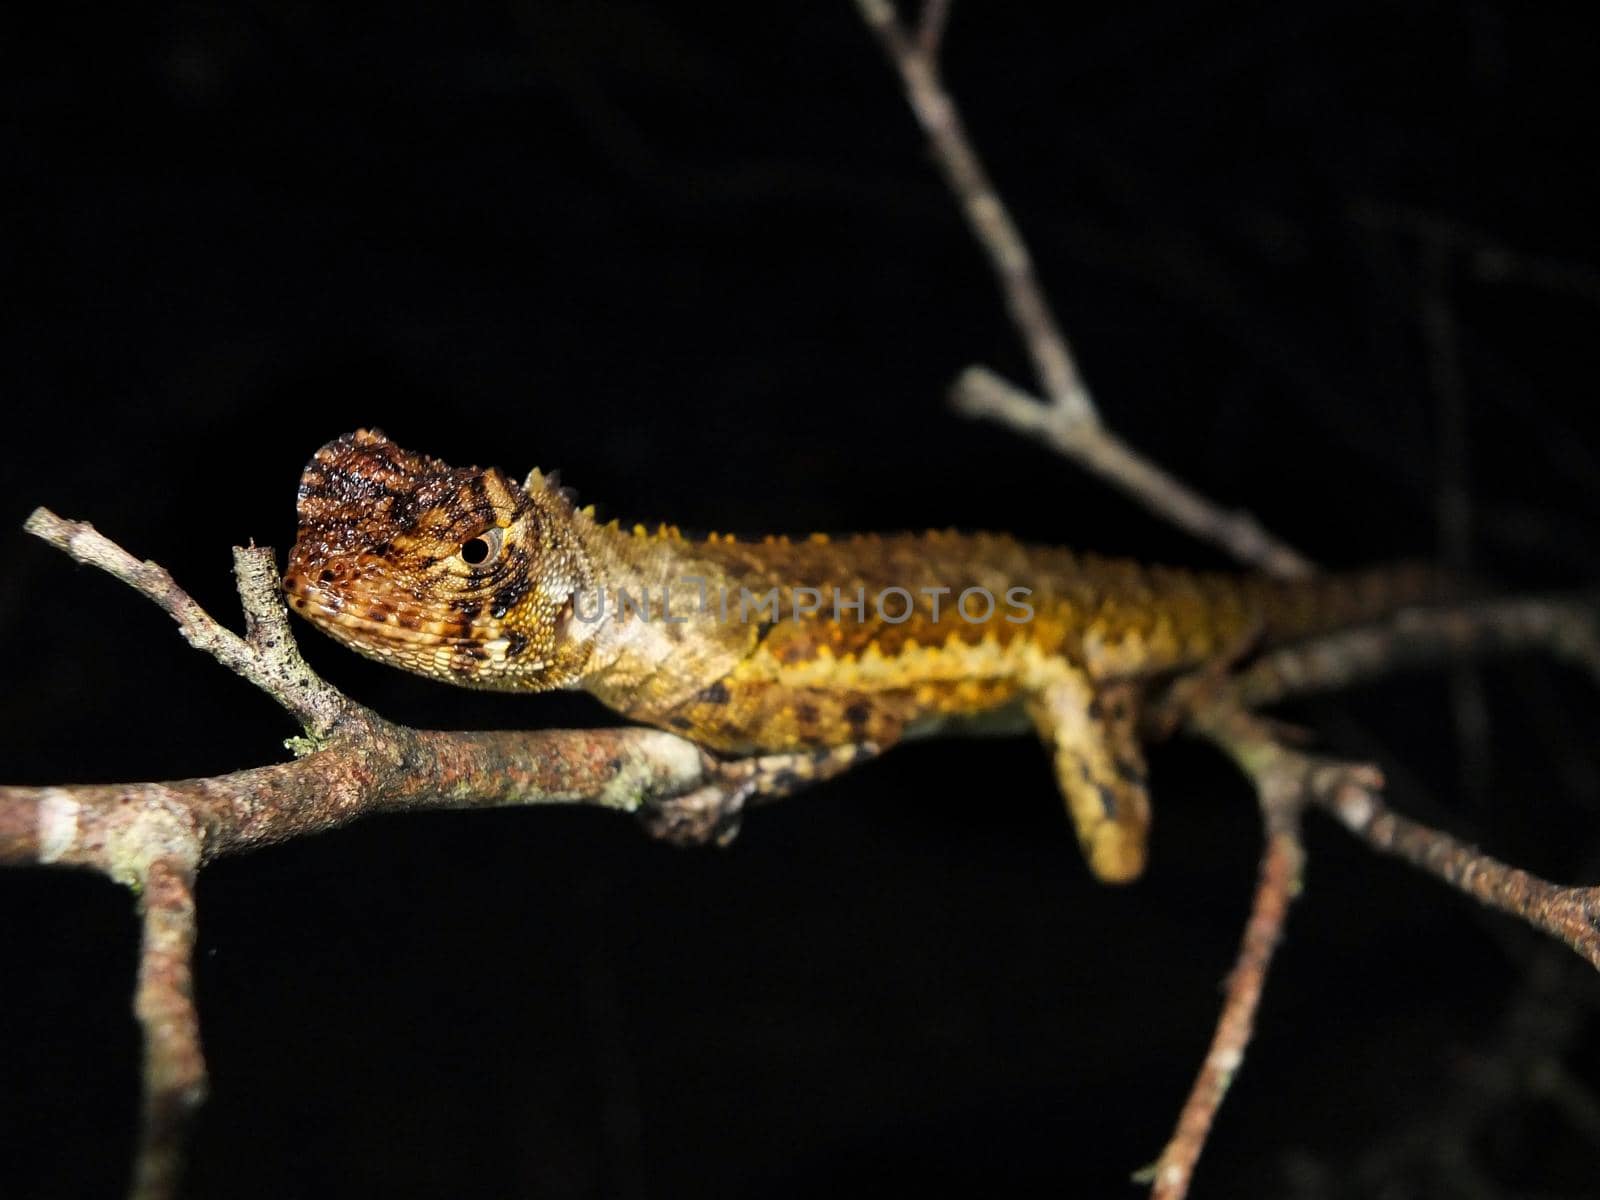 Diving Lizard sitting on a tropical branch at night, Uranoscodon superciliosus